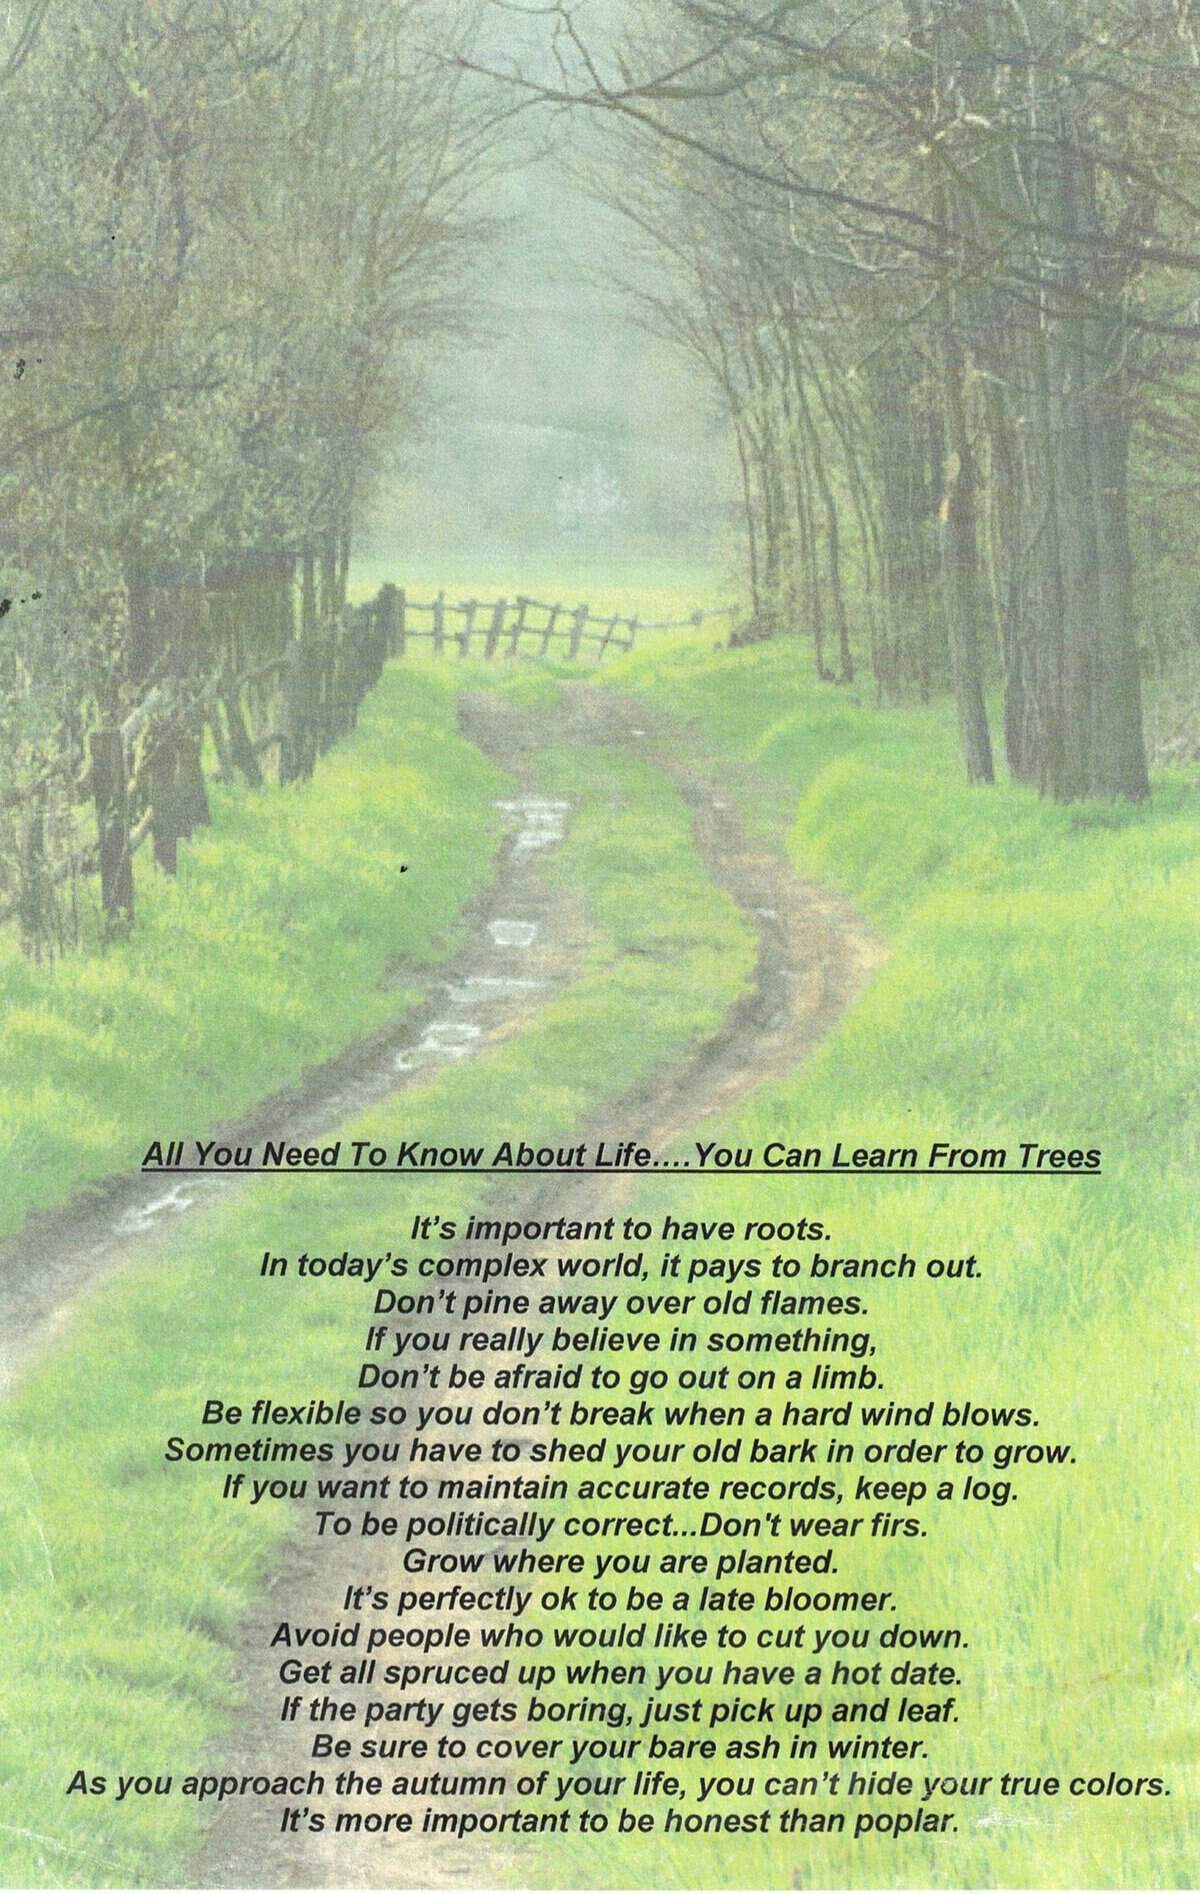 Misty wooded path with life lessons from trees text.